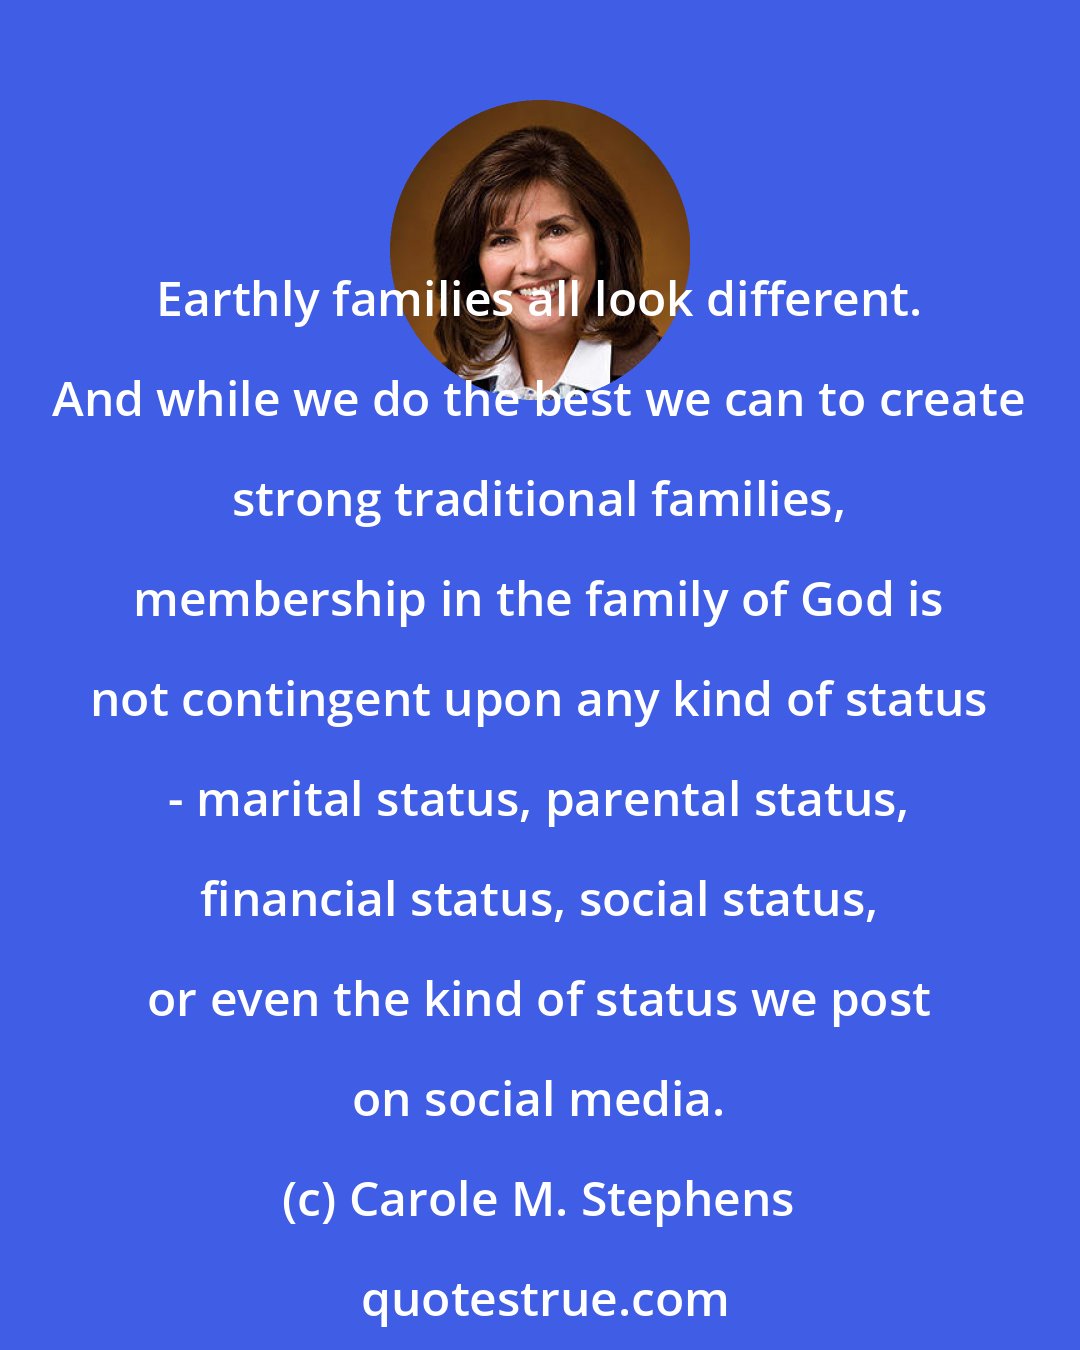 Carole M. Stephens: Earthly families all look different. And while we do the best we can to create strong traditional families, membership in the family of God is not contingent upon any kind of status - marital status, parental status, financial status, social status, or even the kind of status we post on social media.